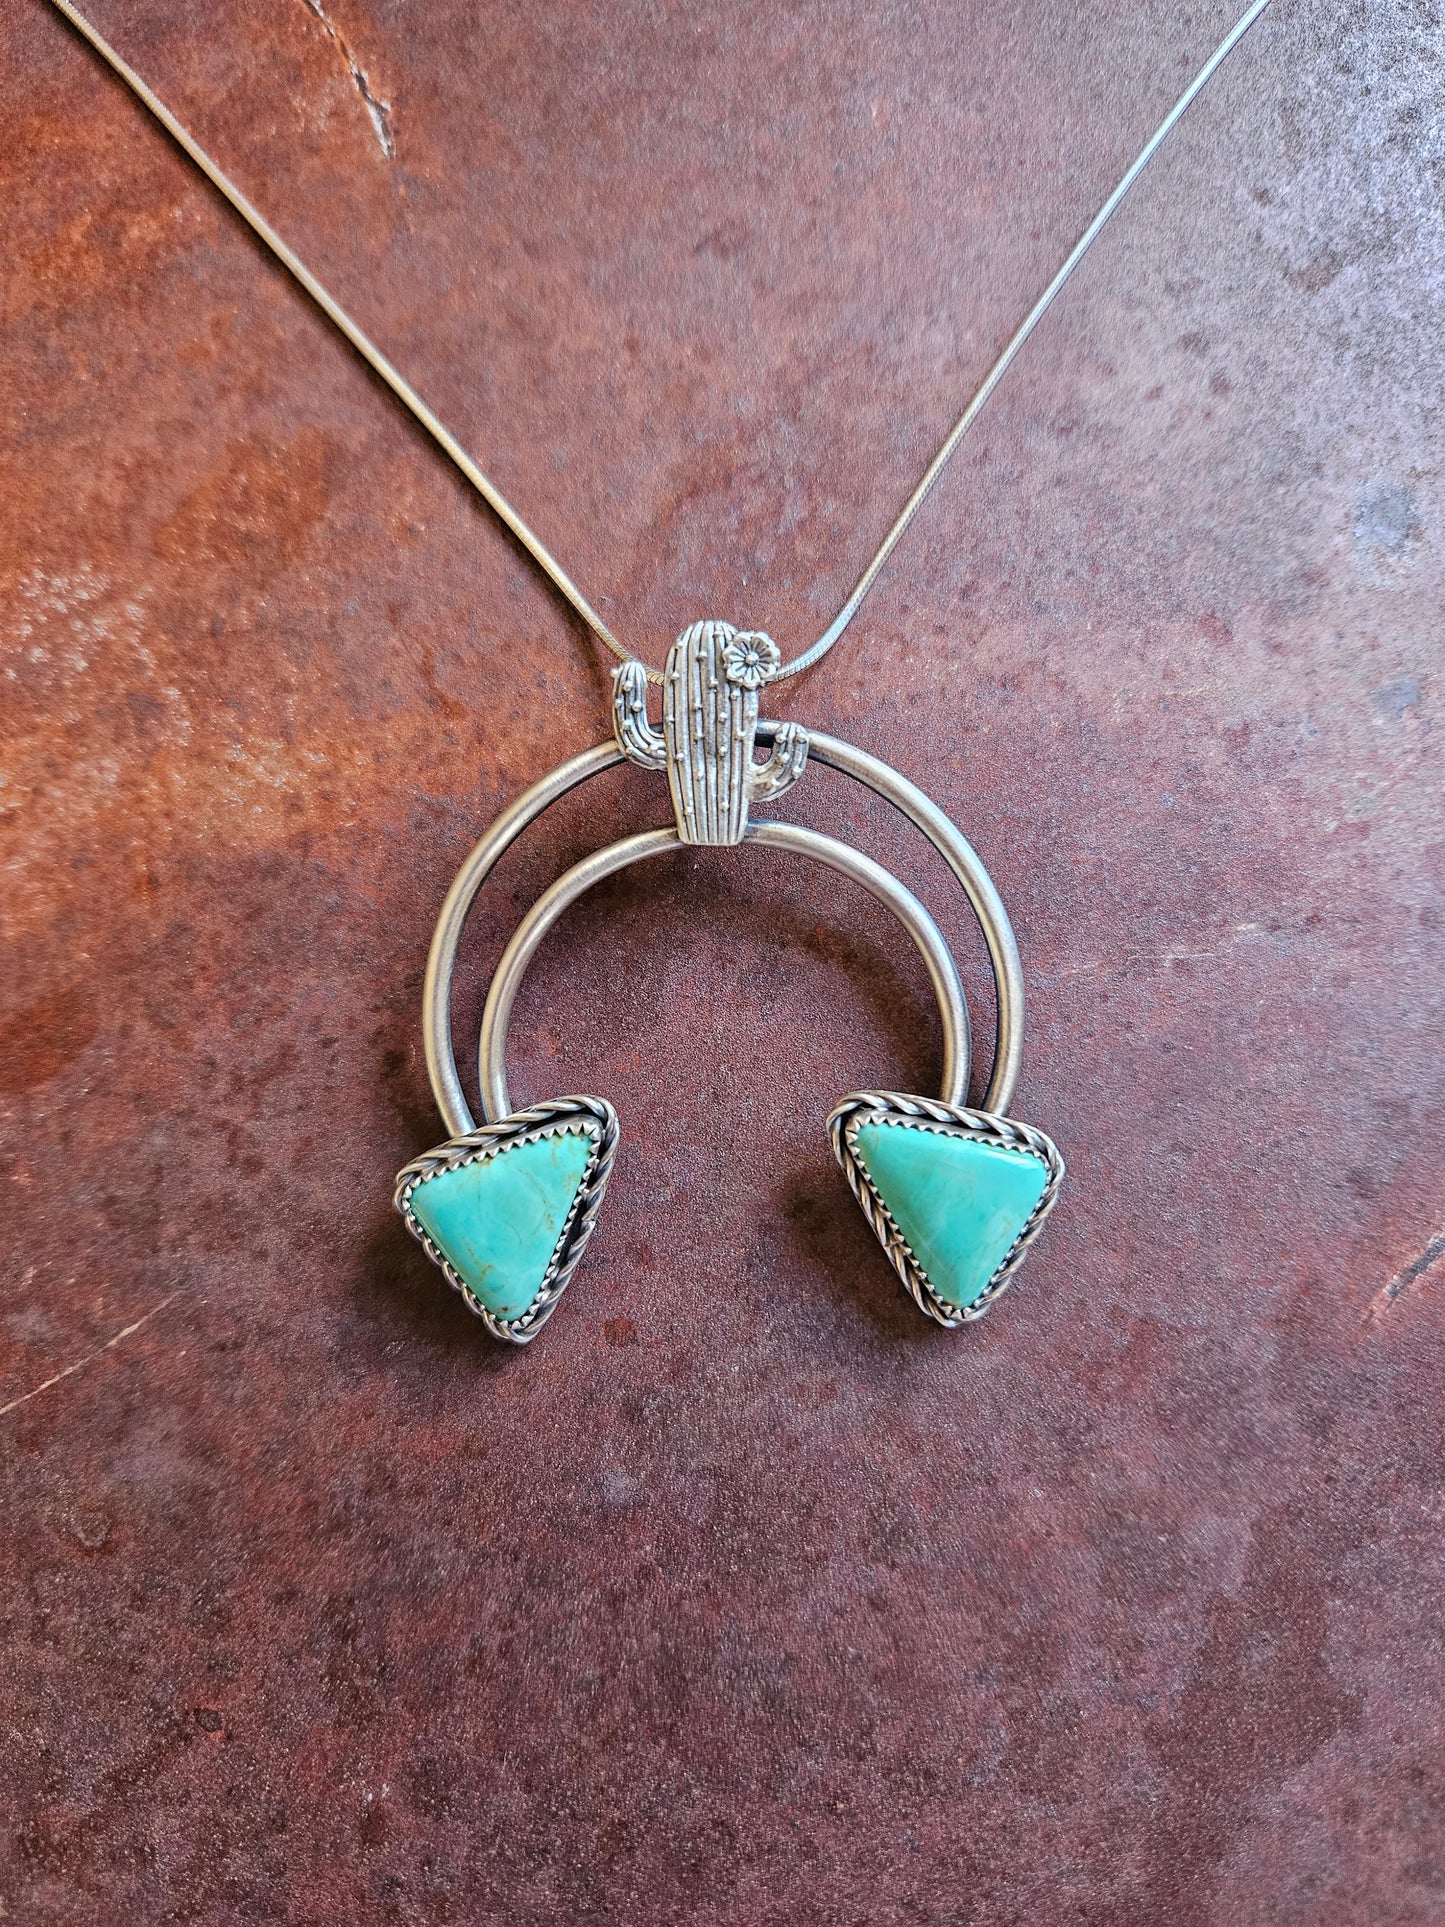 Cactus and Turquoise Pendant